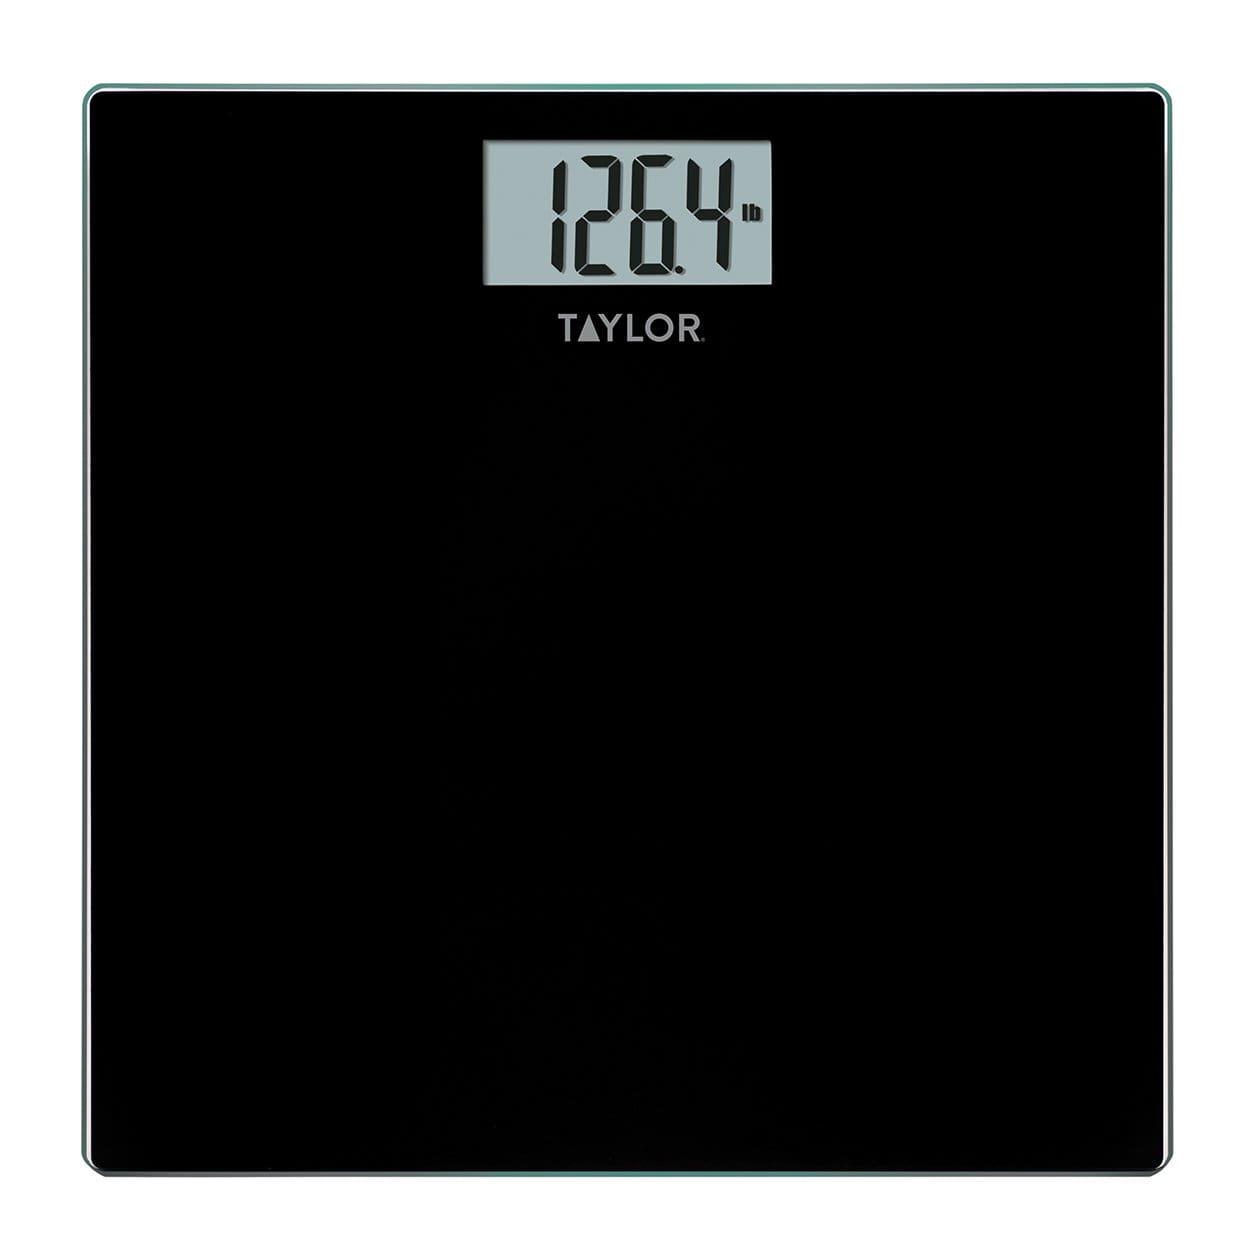 Taylor Digital Bathroom Scale, Highly Accurate Body Weight Scale